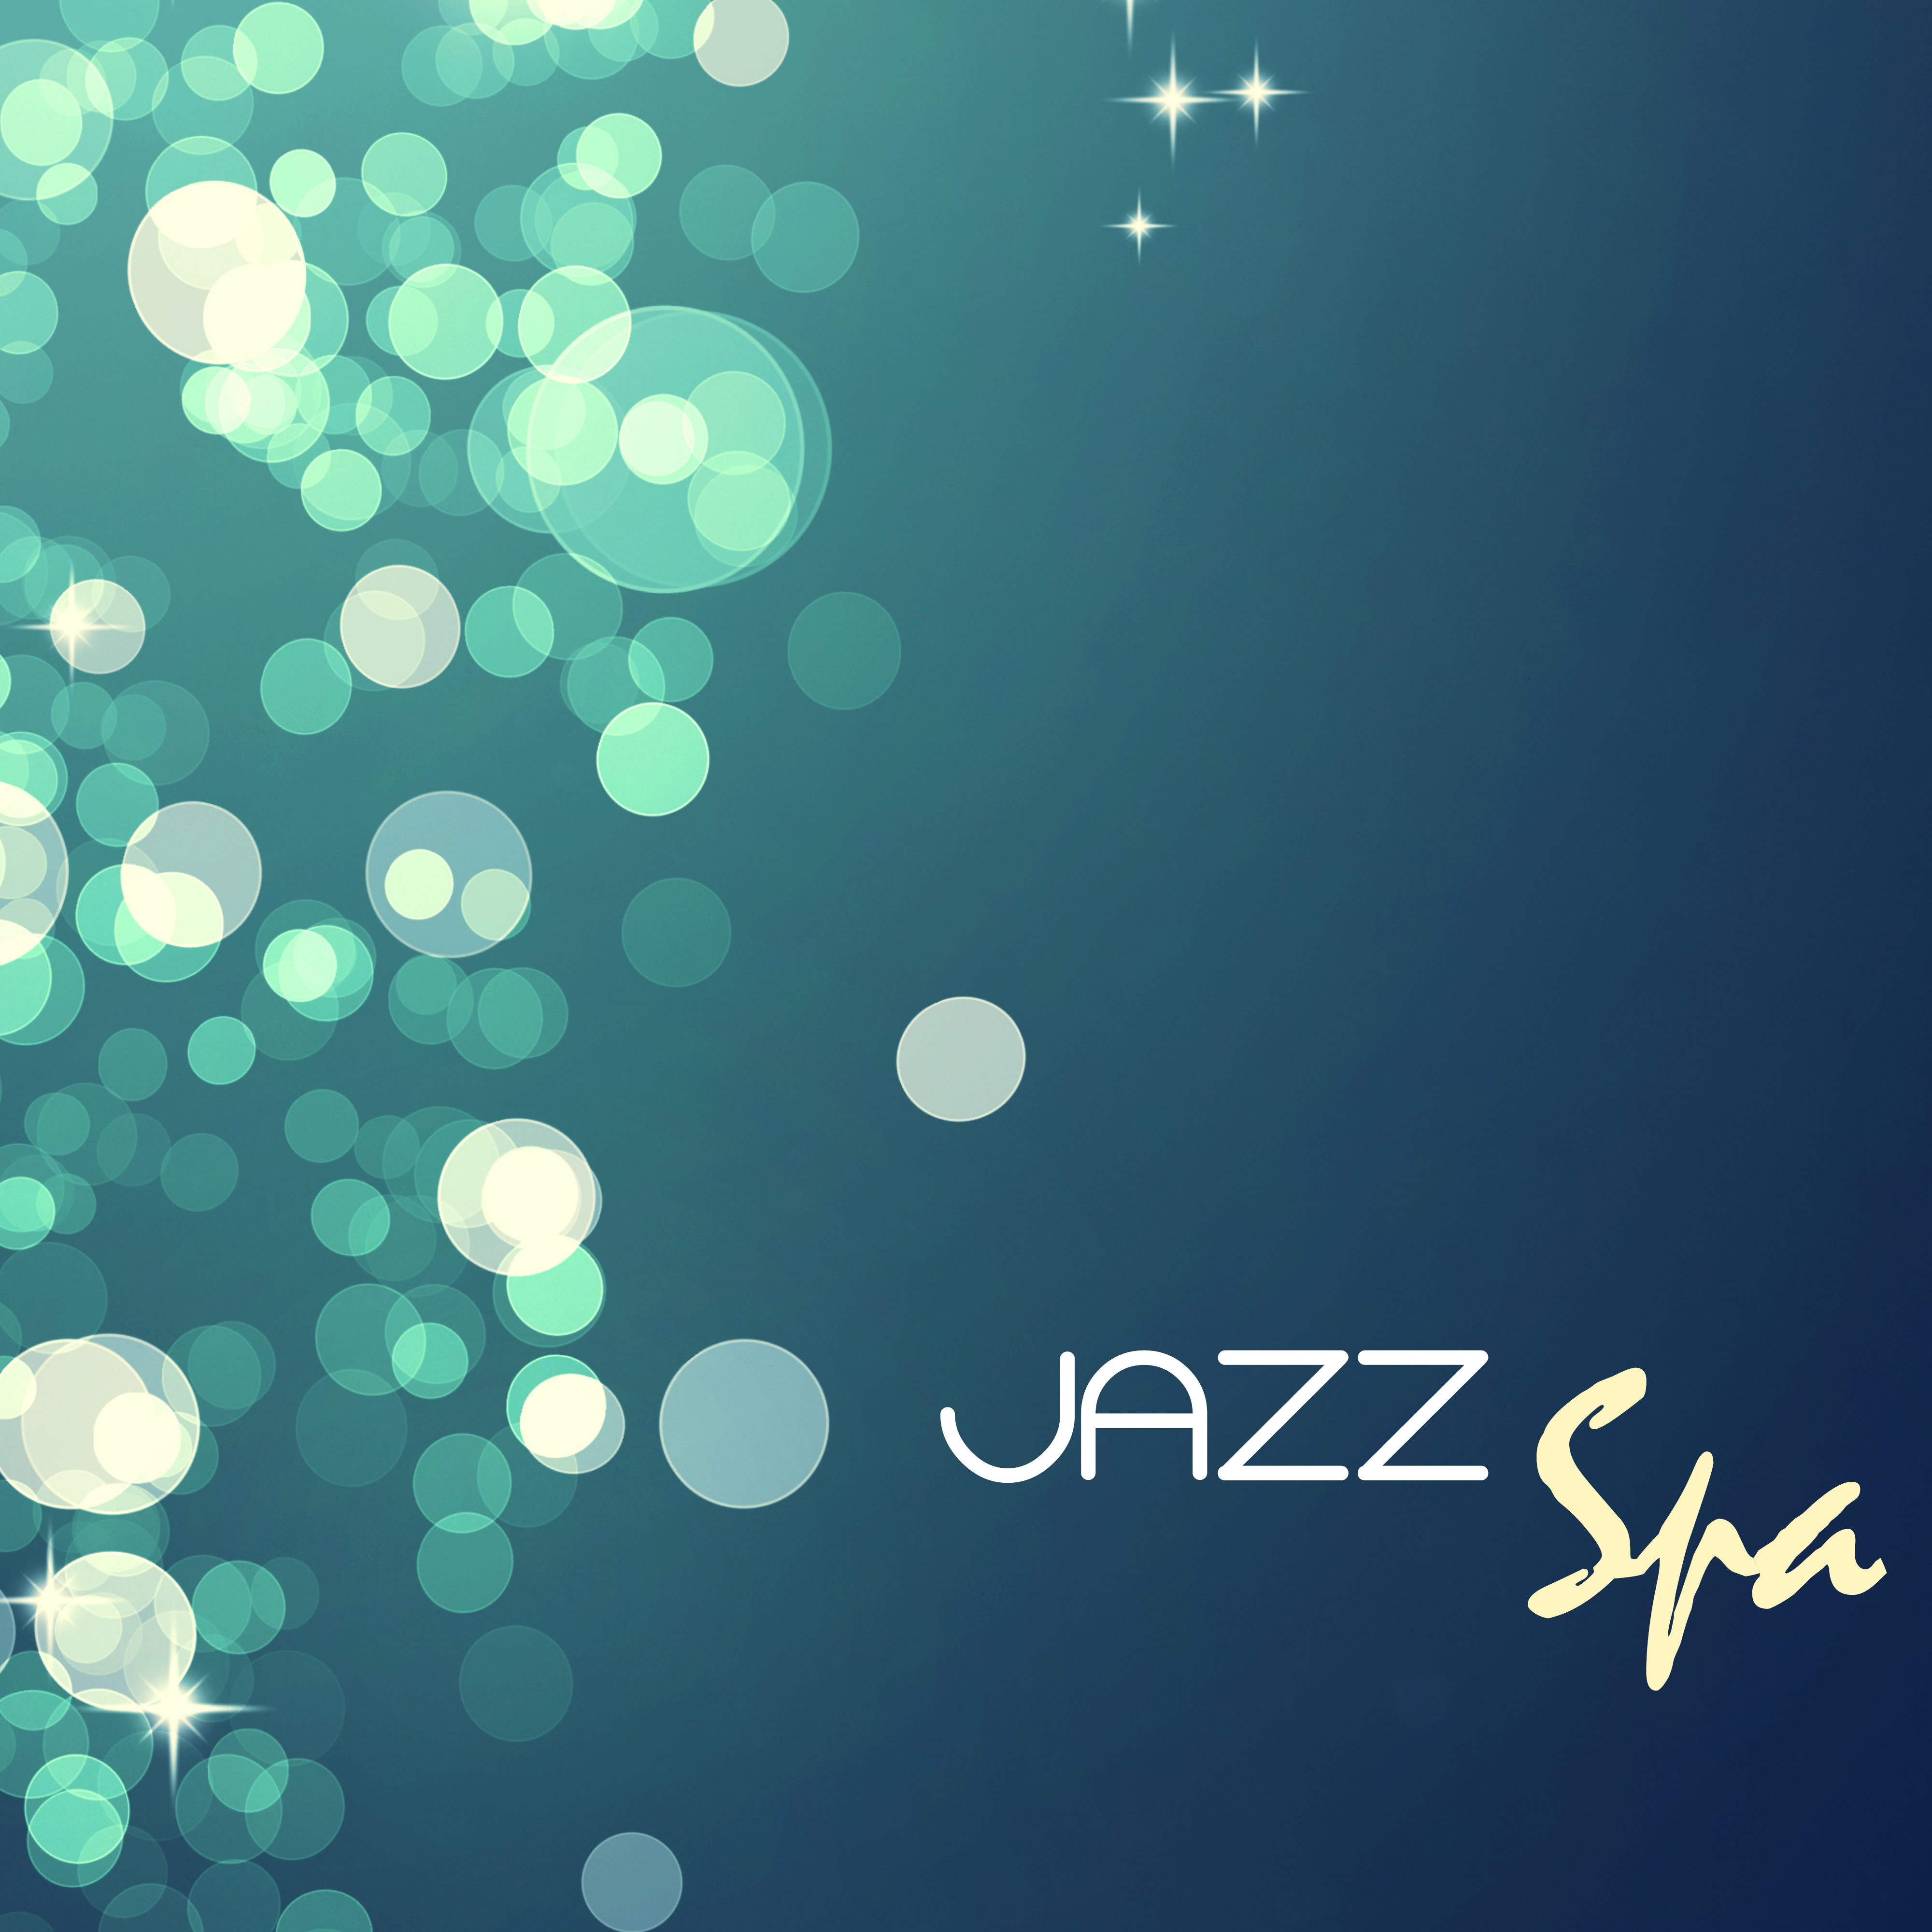 Jazz Spa - Smooth Ambient Guitar Songs & Sounds of Nature Background Music for Massage and Wellness Center Therapy